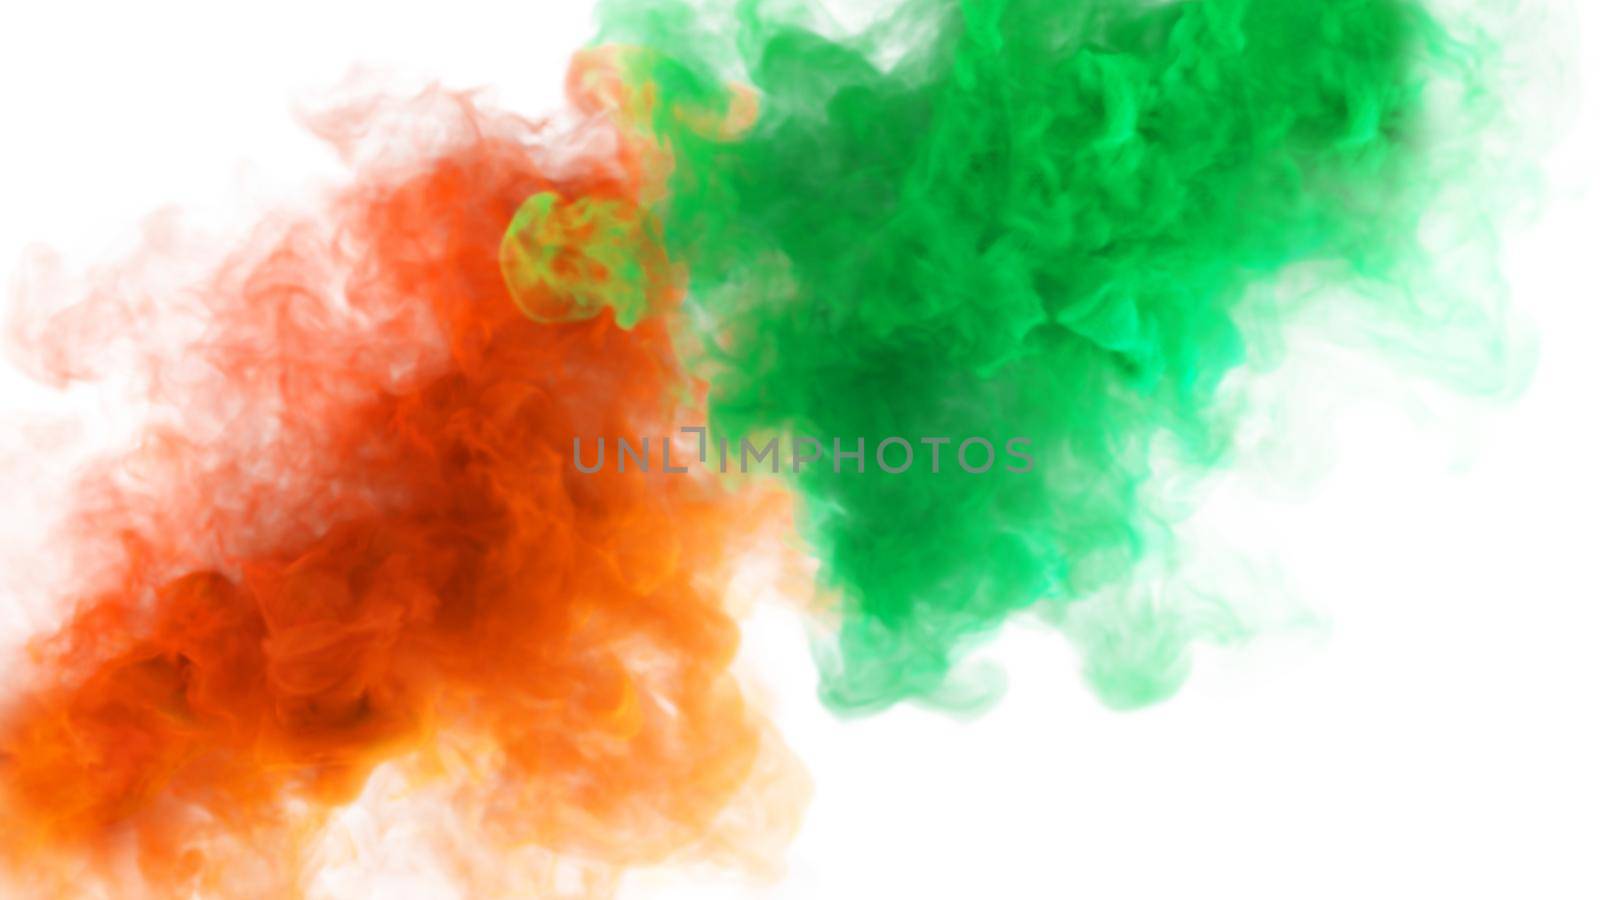 Irish Green and Orange mystery smoke texture on a white background by Xeniasnowstorm